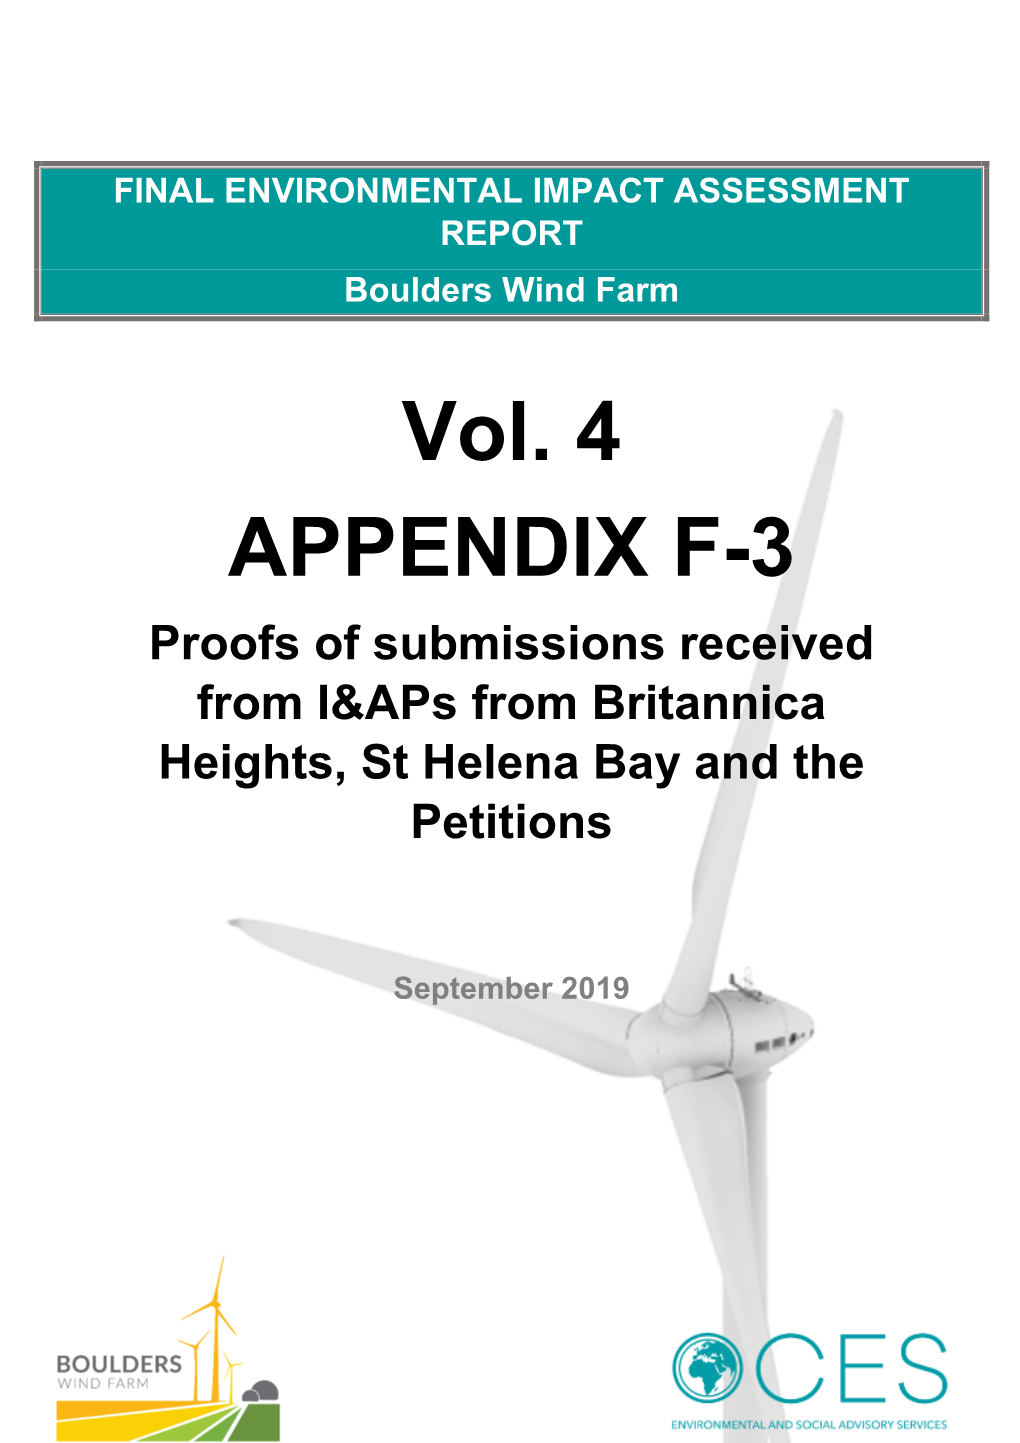 Vol. 4 APPENDIX F-3 Proofs of Submissions Received from I&Aps from Britannica Heights, St Helena Bay and the Petitions